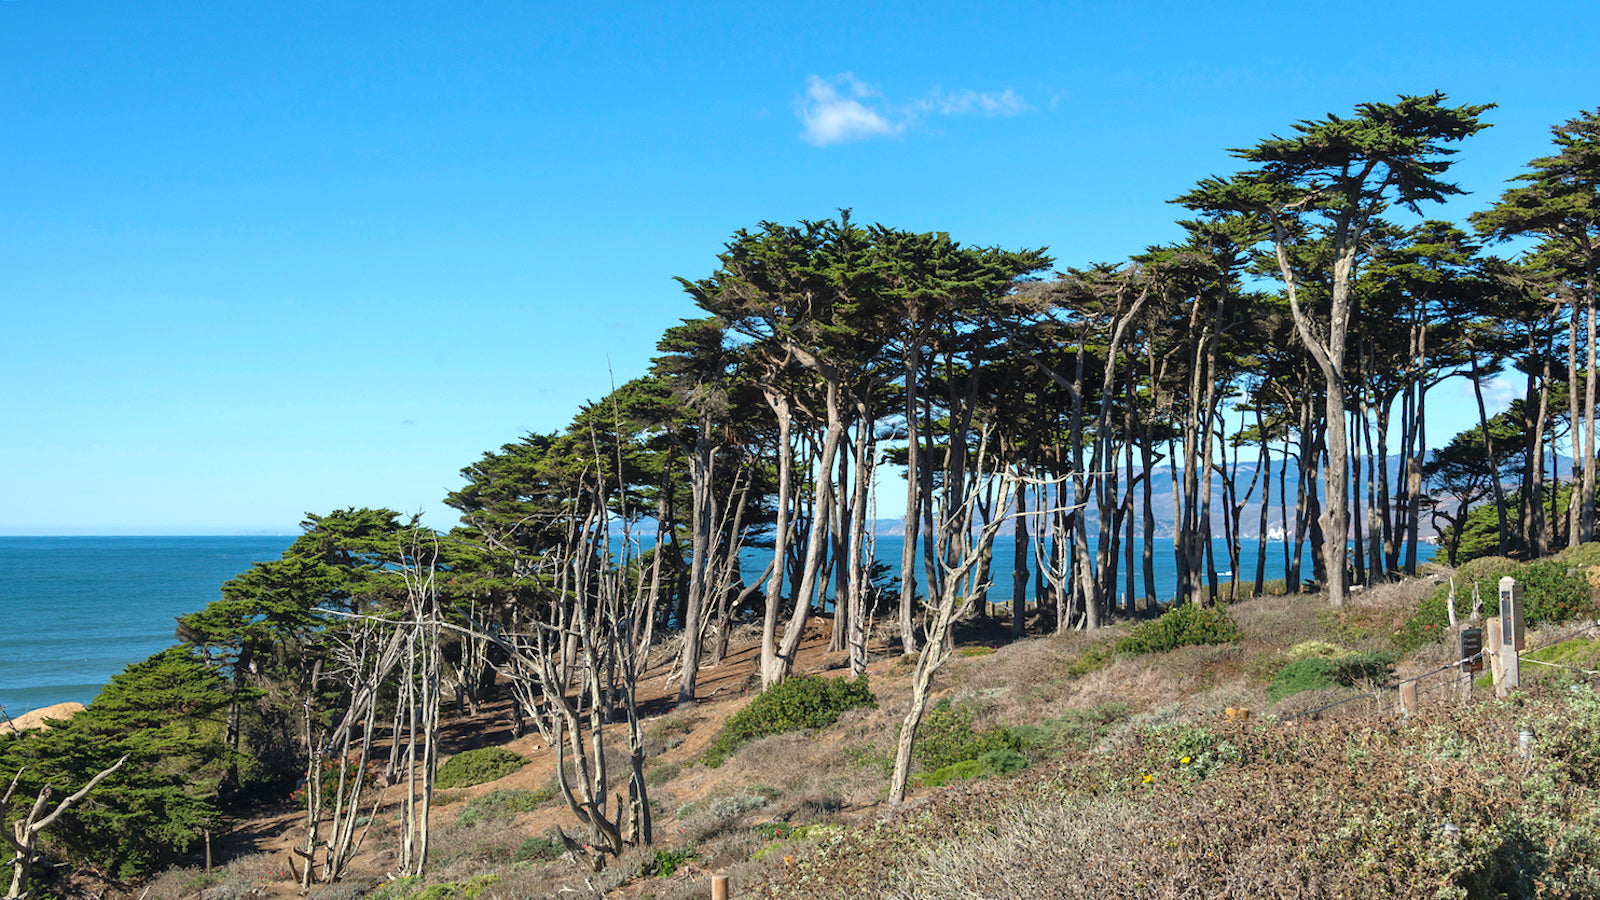 Cypress trees line the shoreline at Lands End in San Francisco.